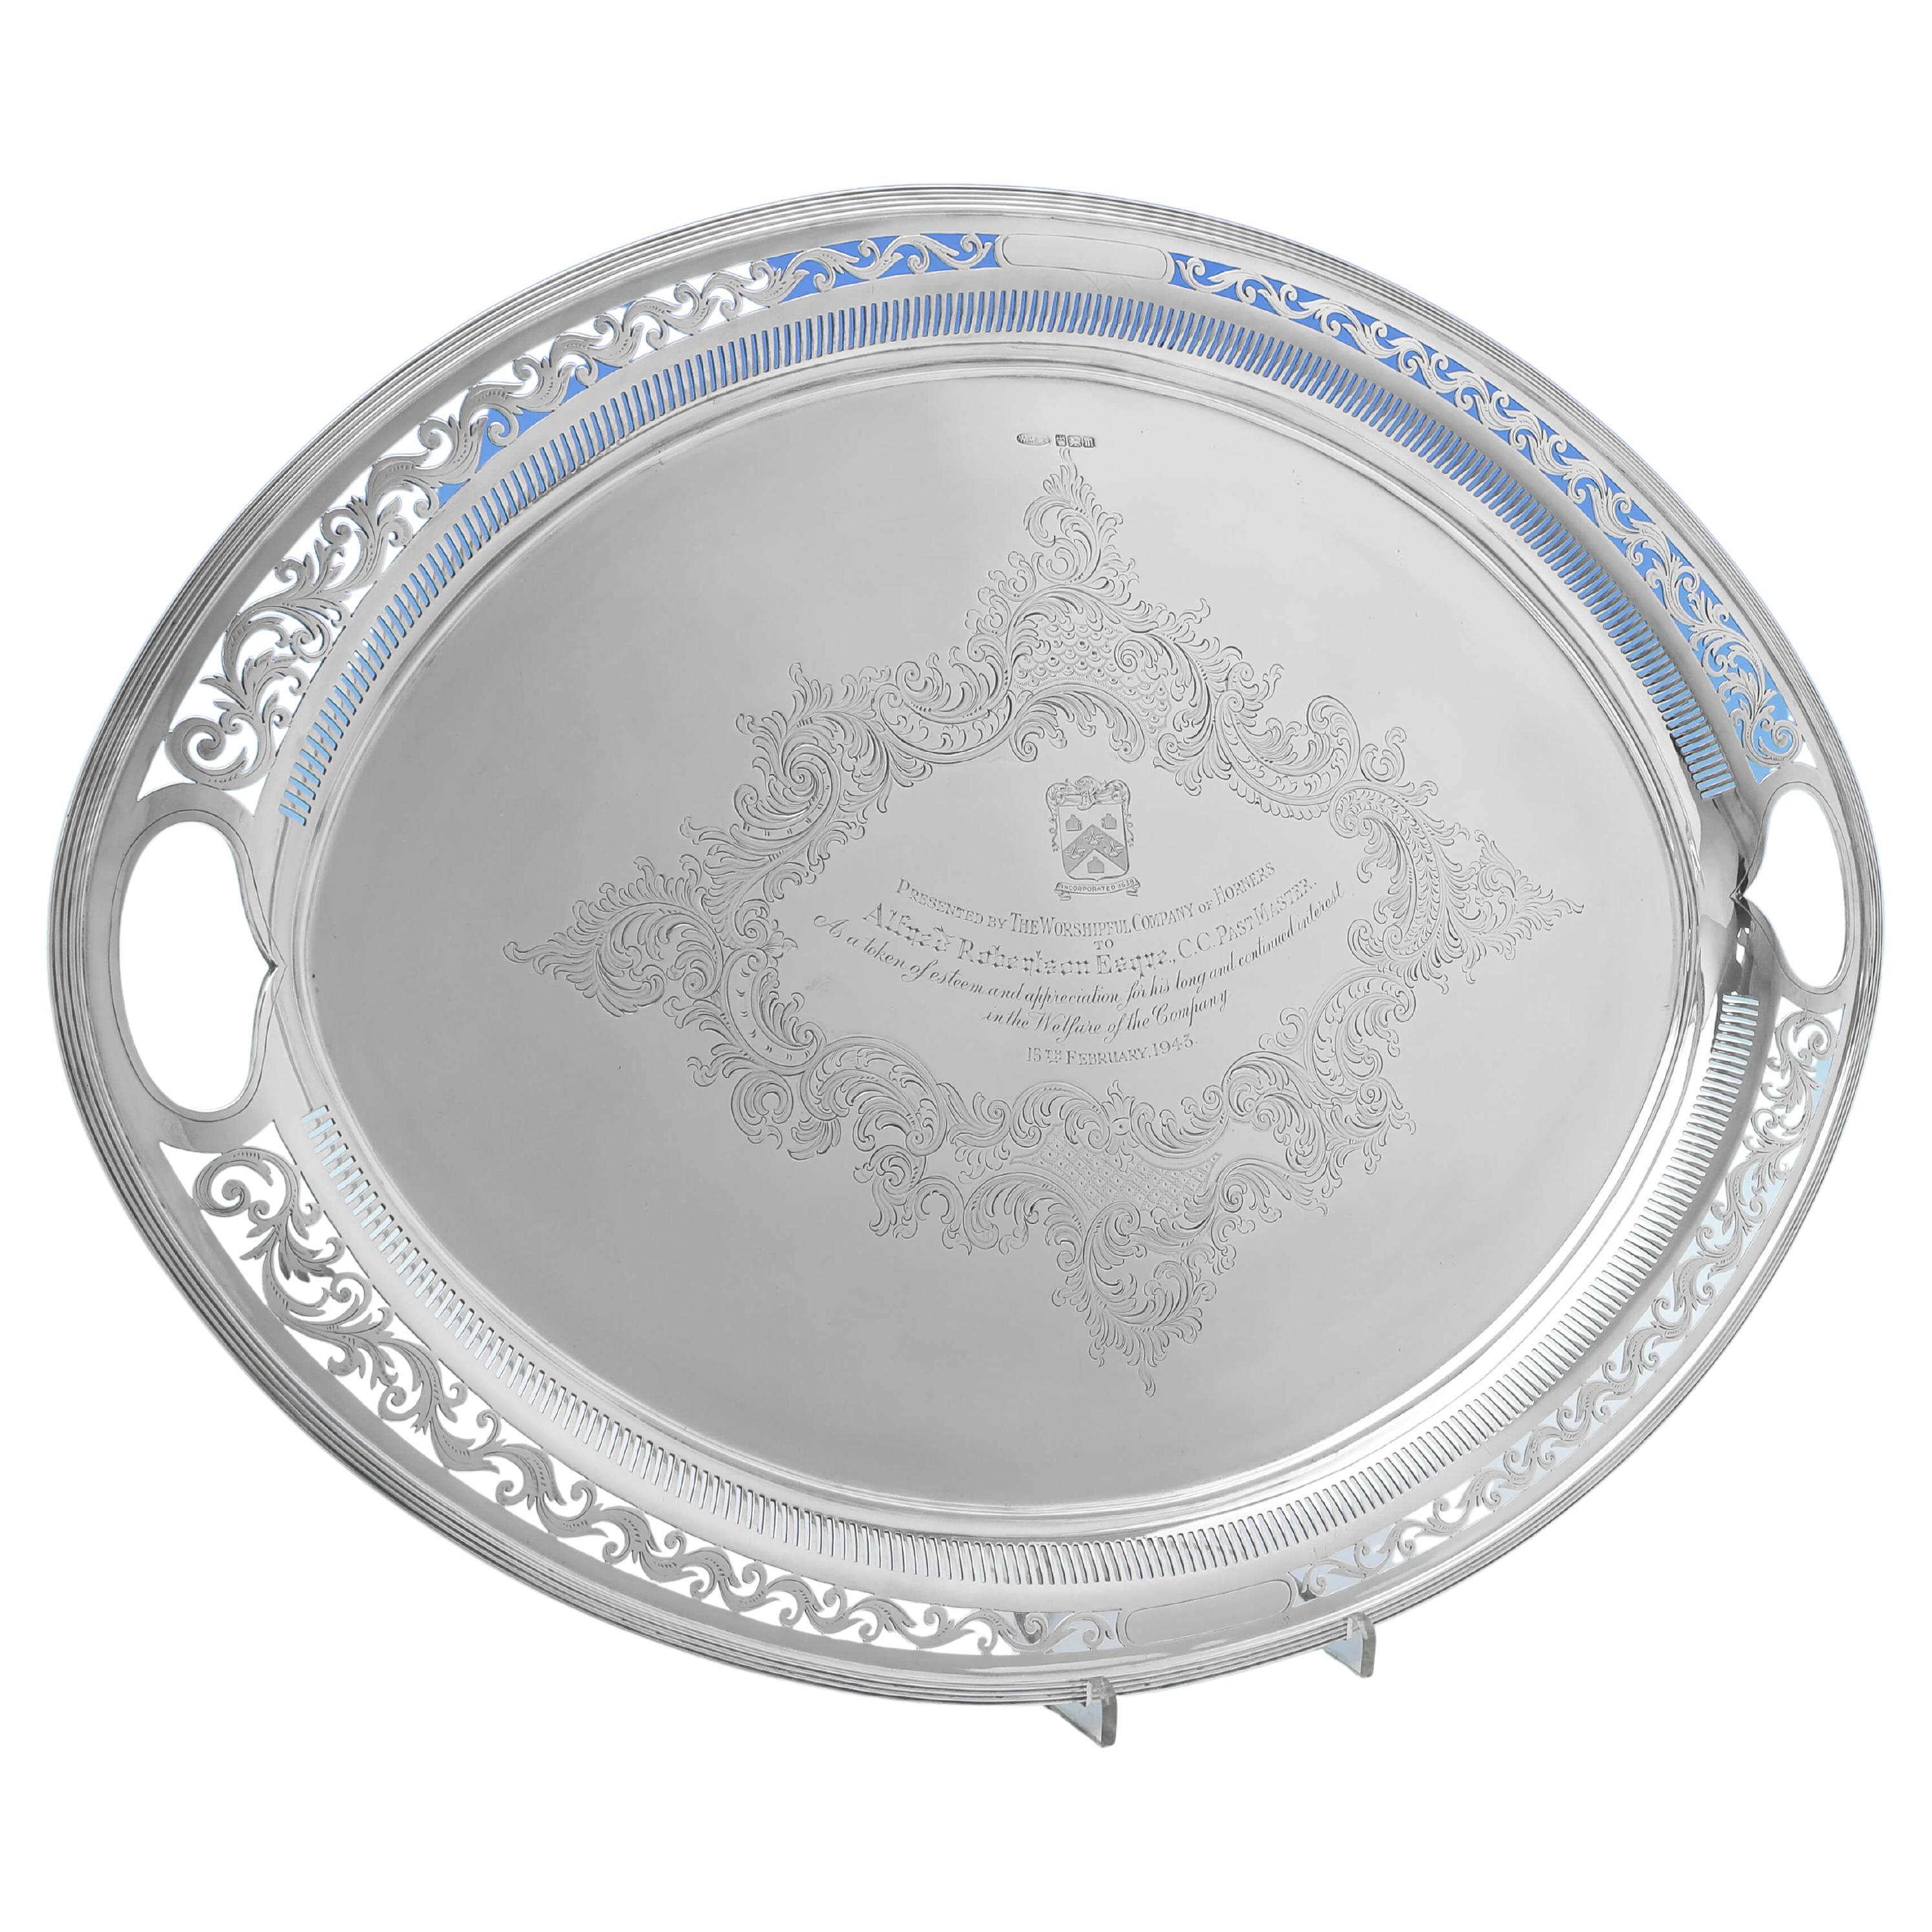 Worshipful Company of Horners, Presentation Tray, Antique Sterling Silver, 1904 For Sale